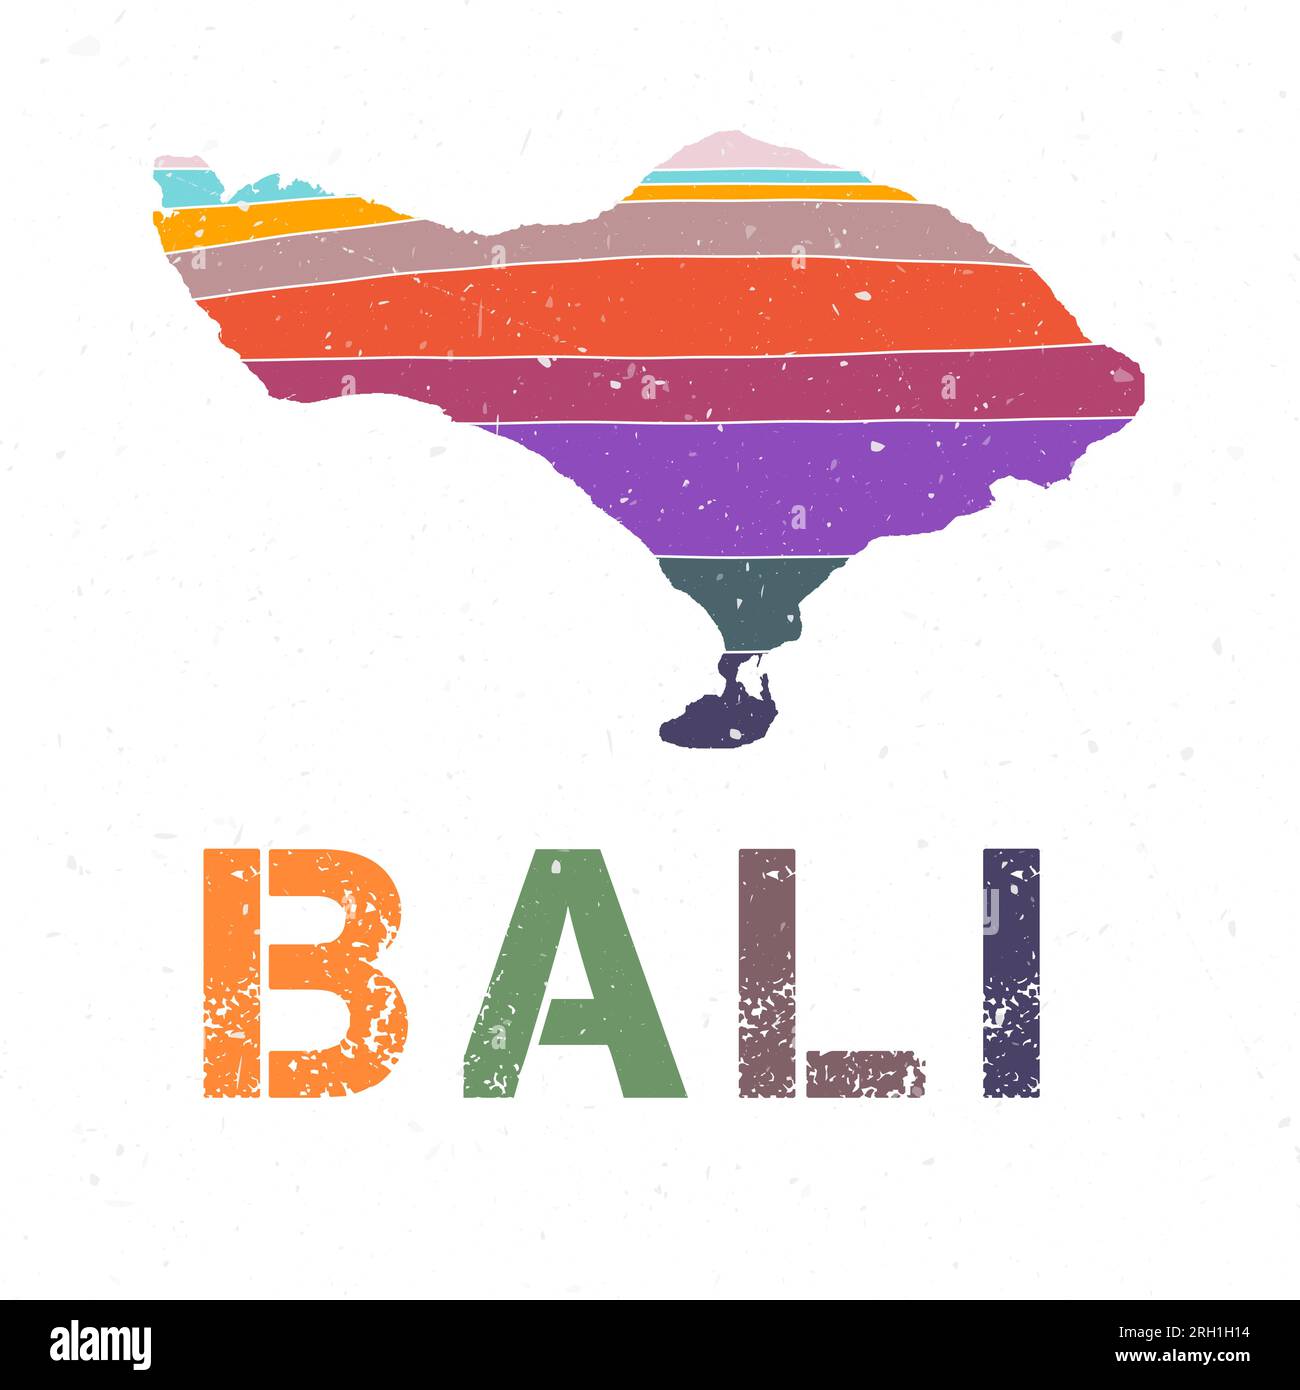 Bali map design. Shape of the island with beautiful geometric waves and ...